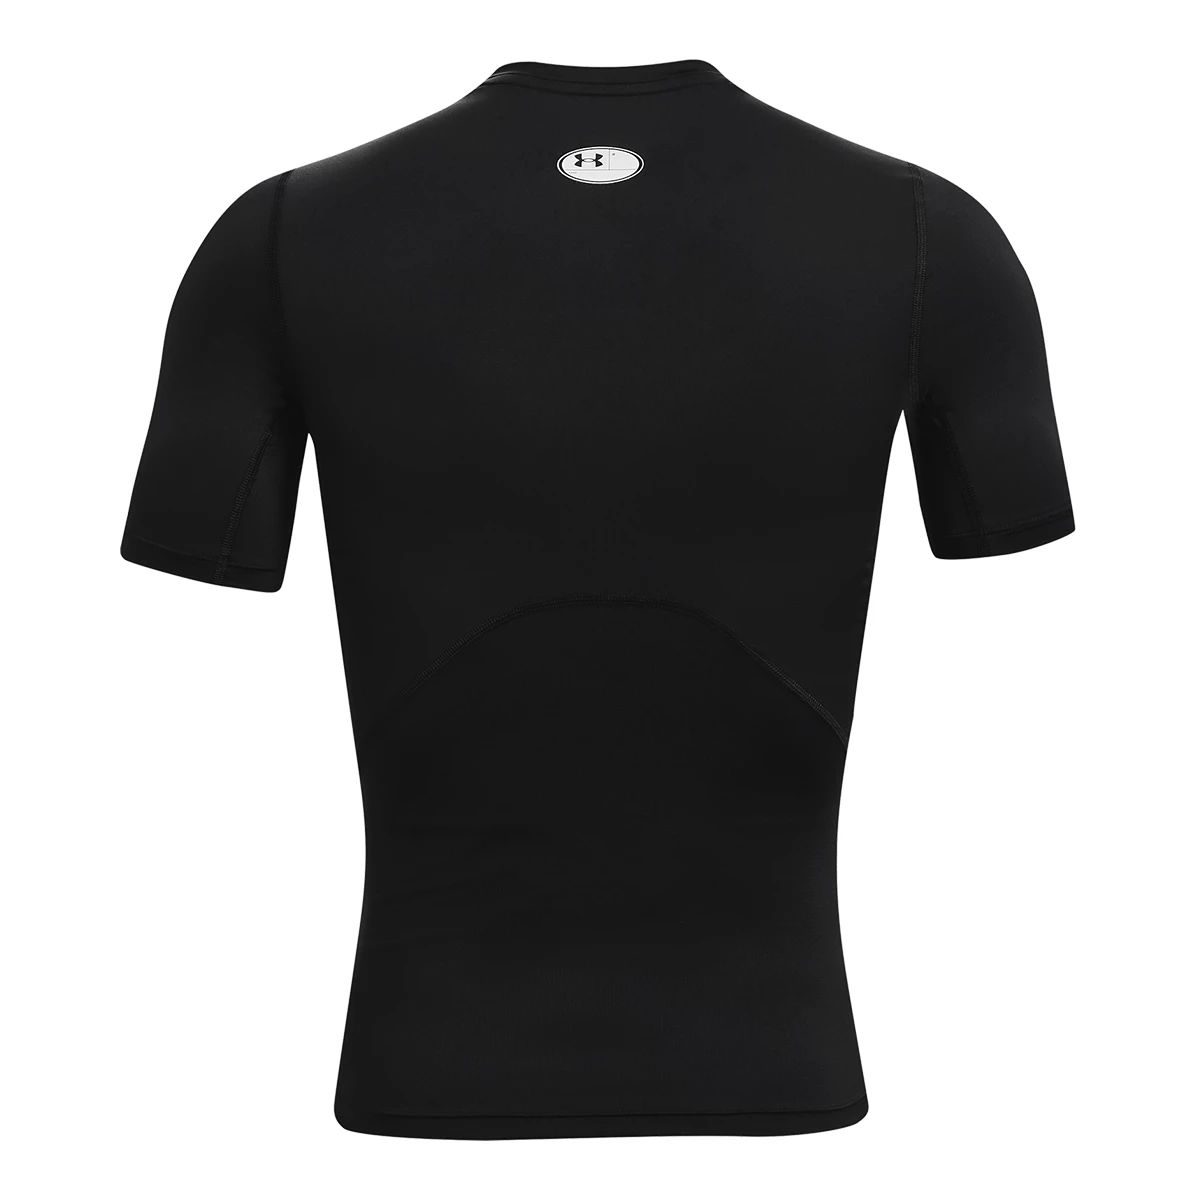 Under Armour Heatgear Coolswitch Compression 1295138-600 Short Sleeve  T-Shirt